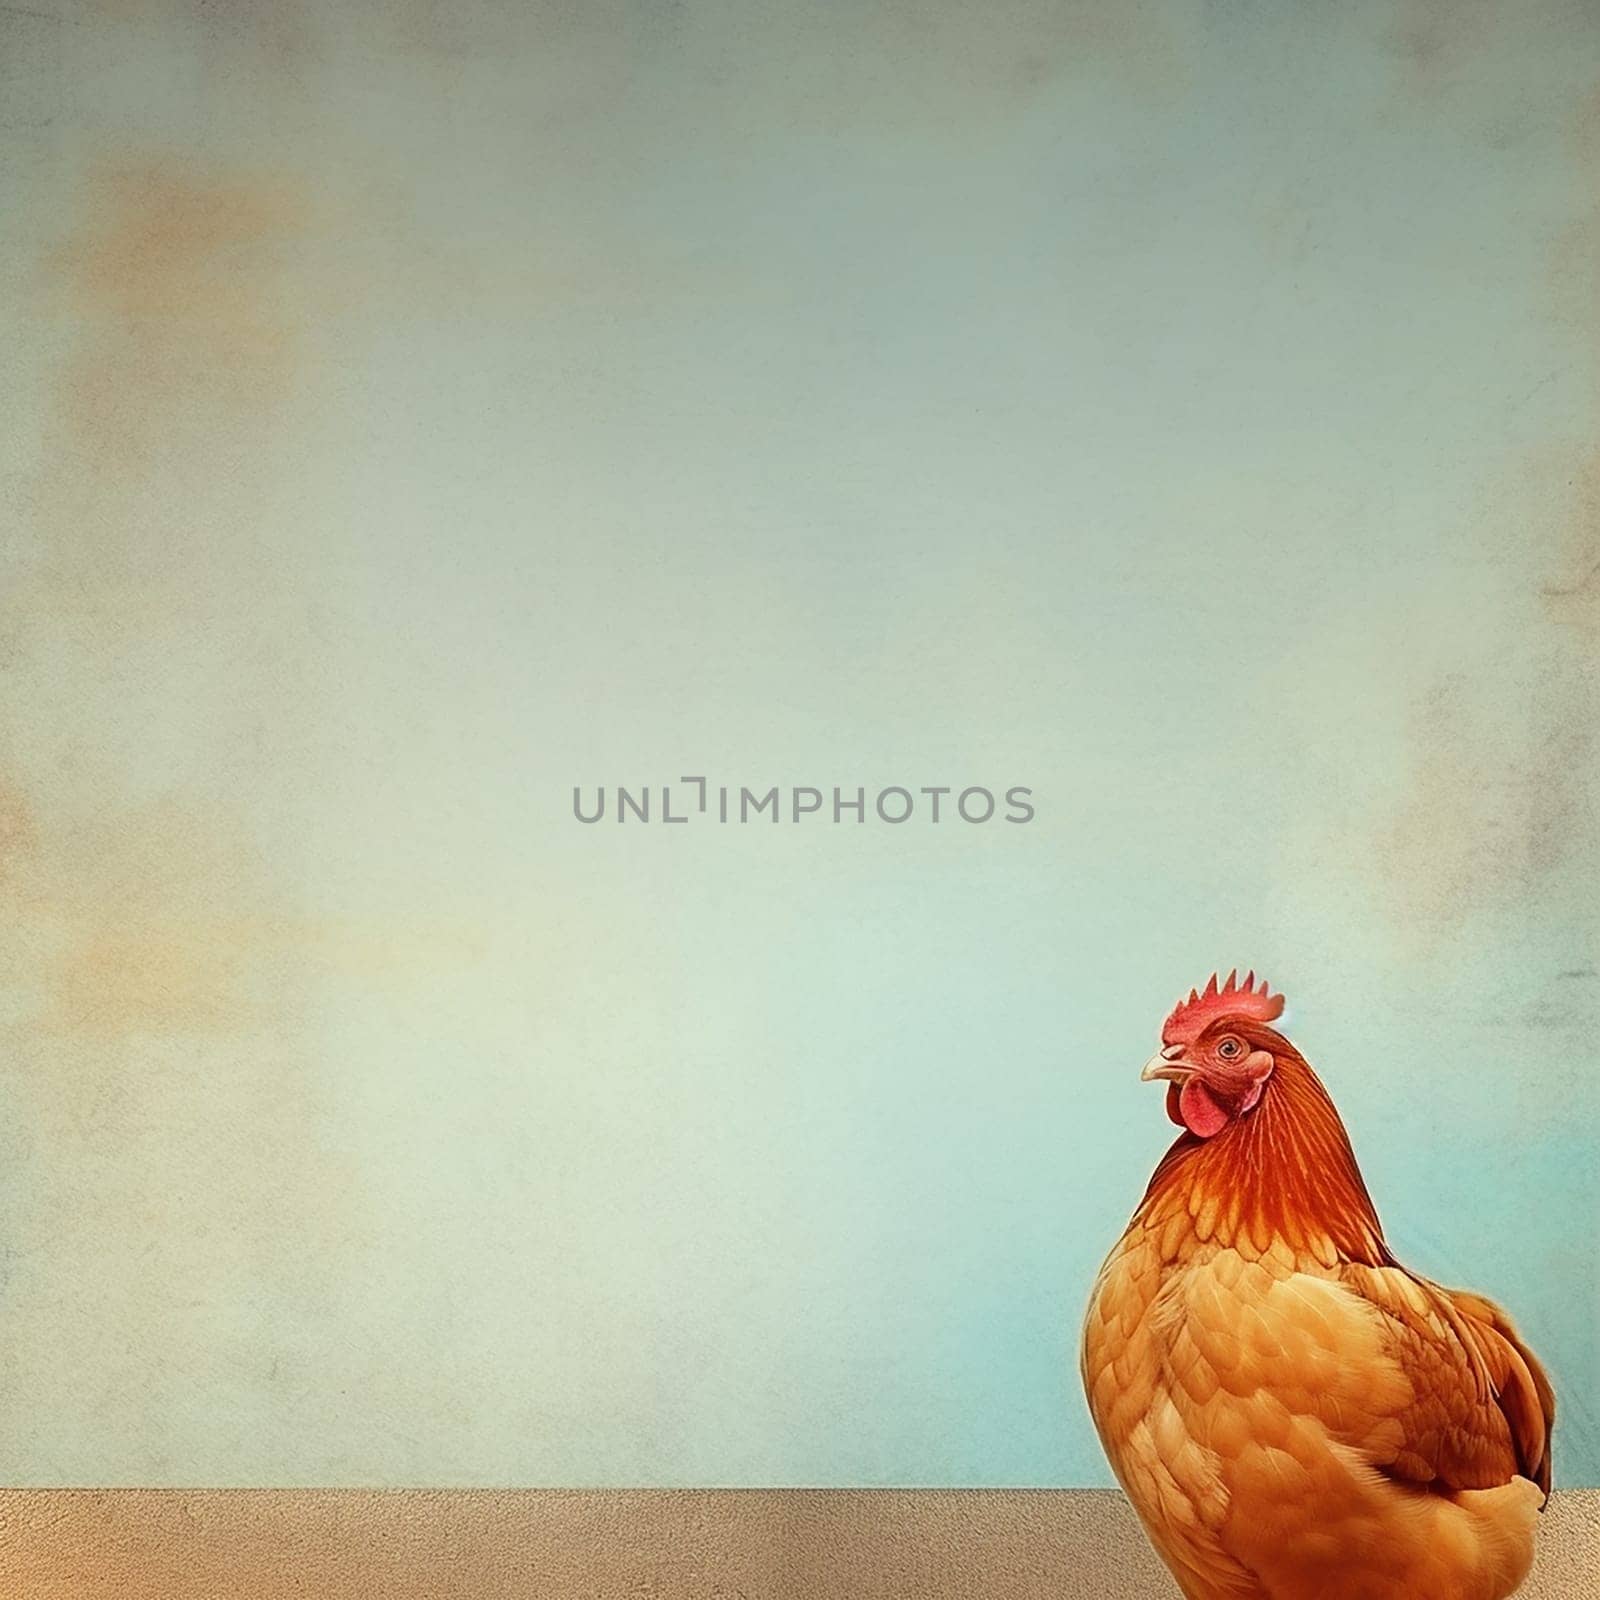 A single rooster against a textured blue background with ample copy space.